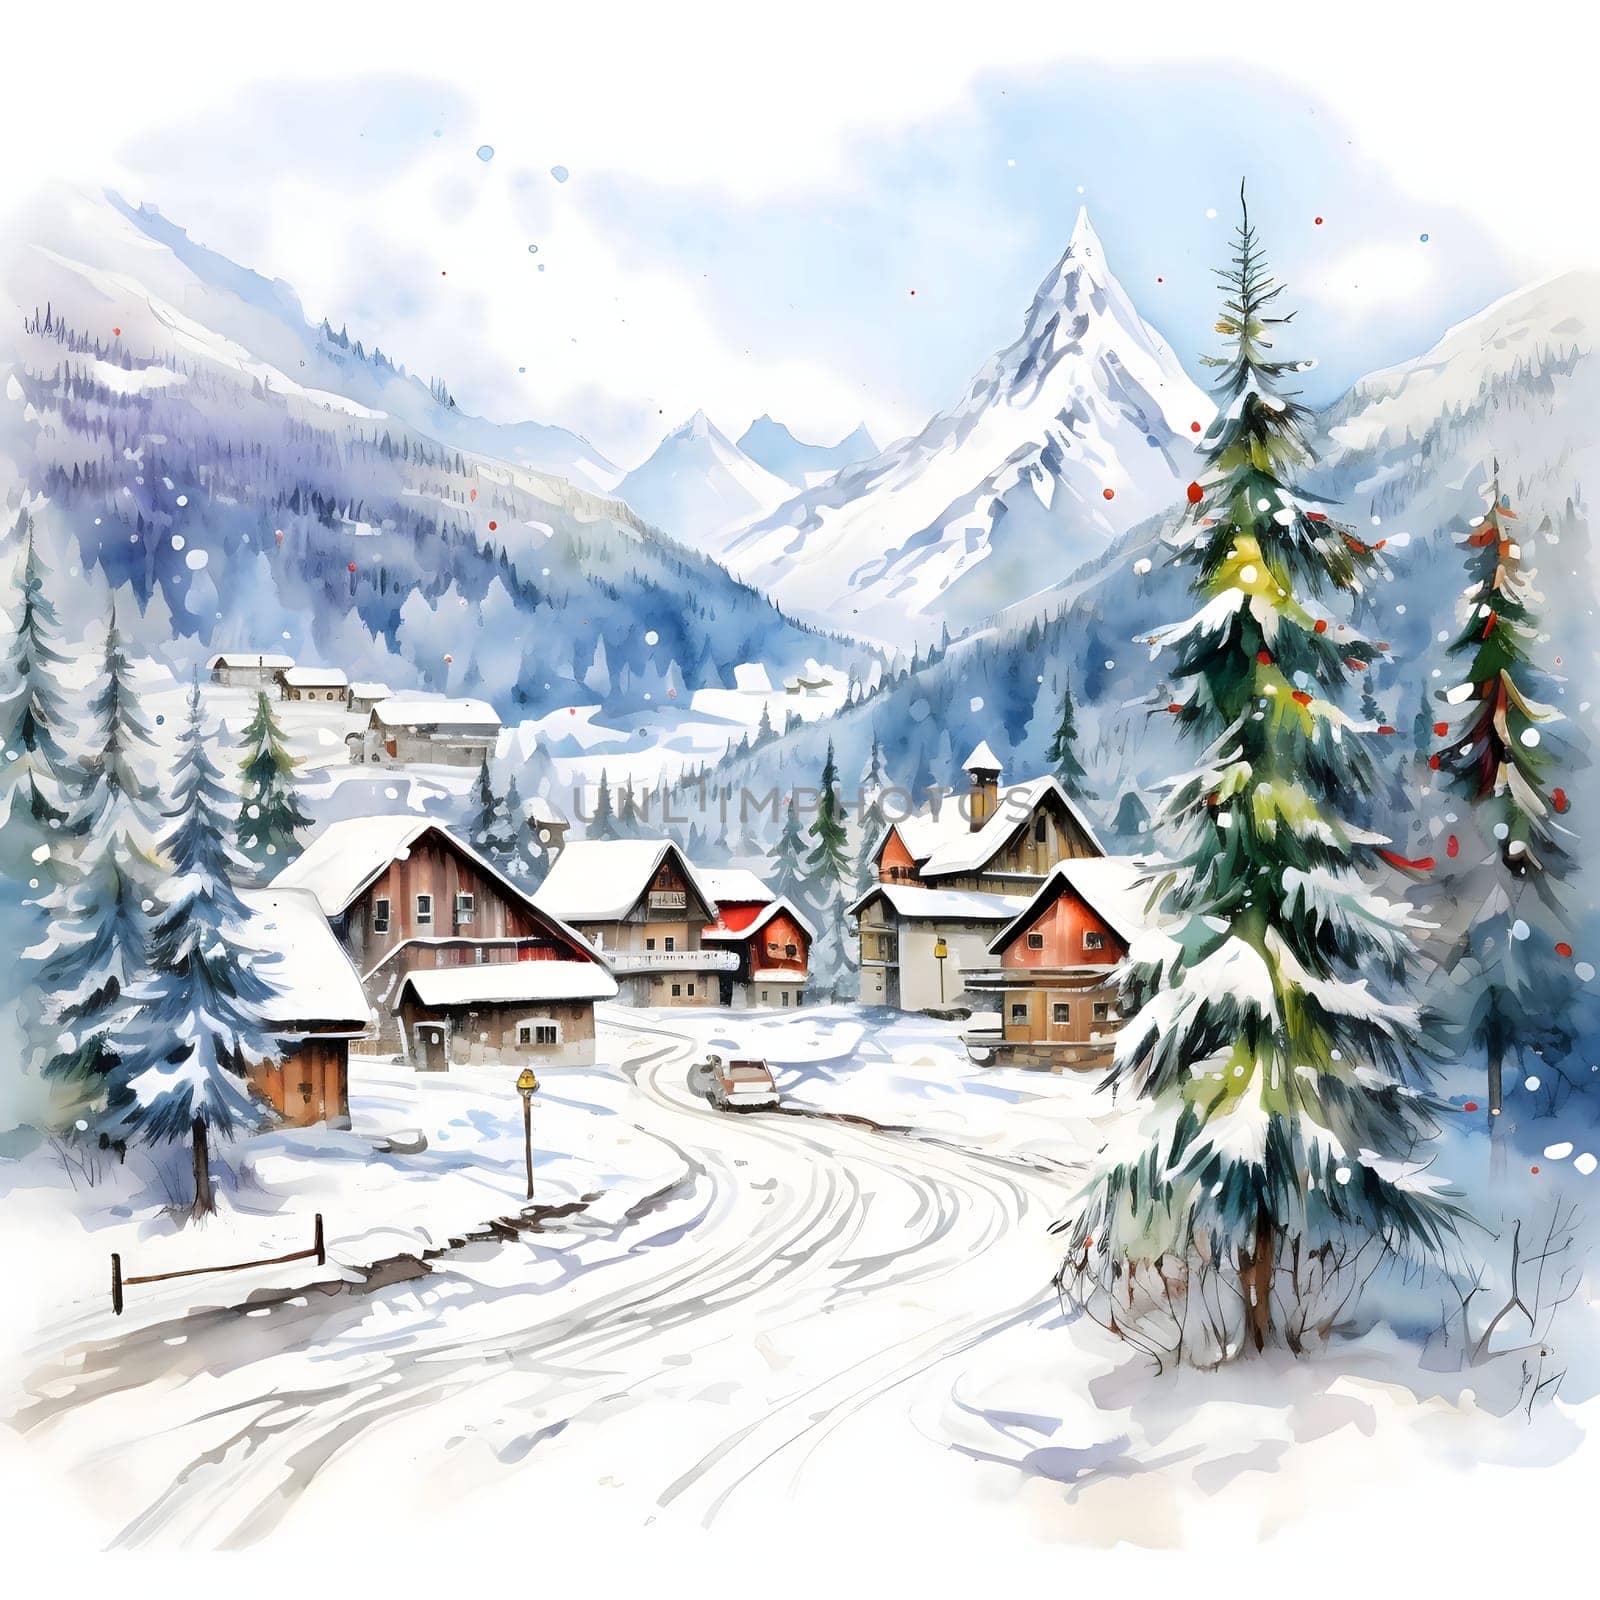 Winter painted landscape: Christmas trees houses, day, falling snow. Xmas tree as a symbol of Christmas of the birth of the Savior. A time of joy and celebration.